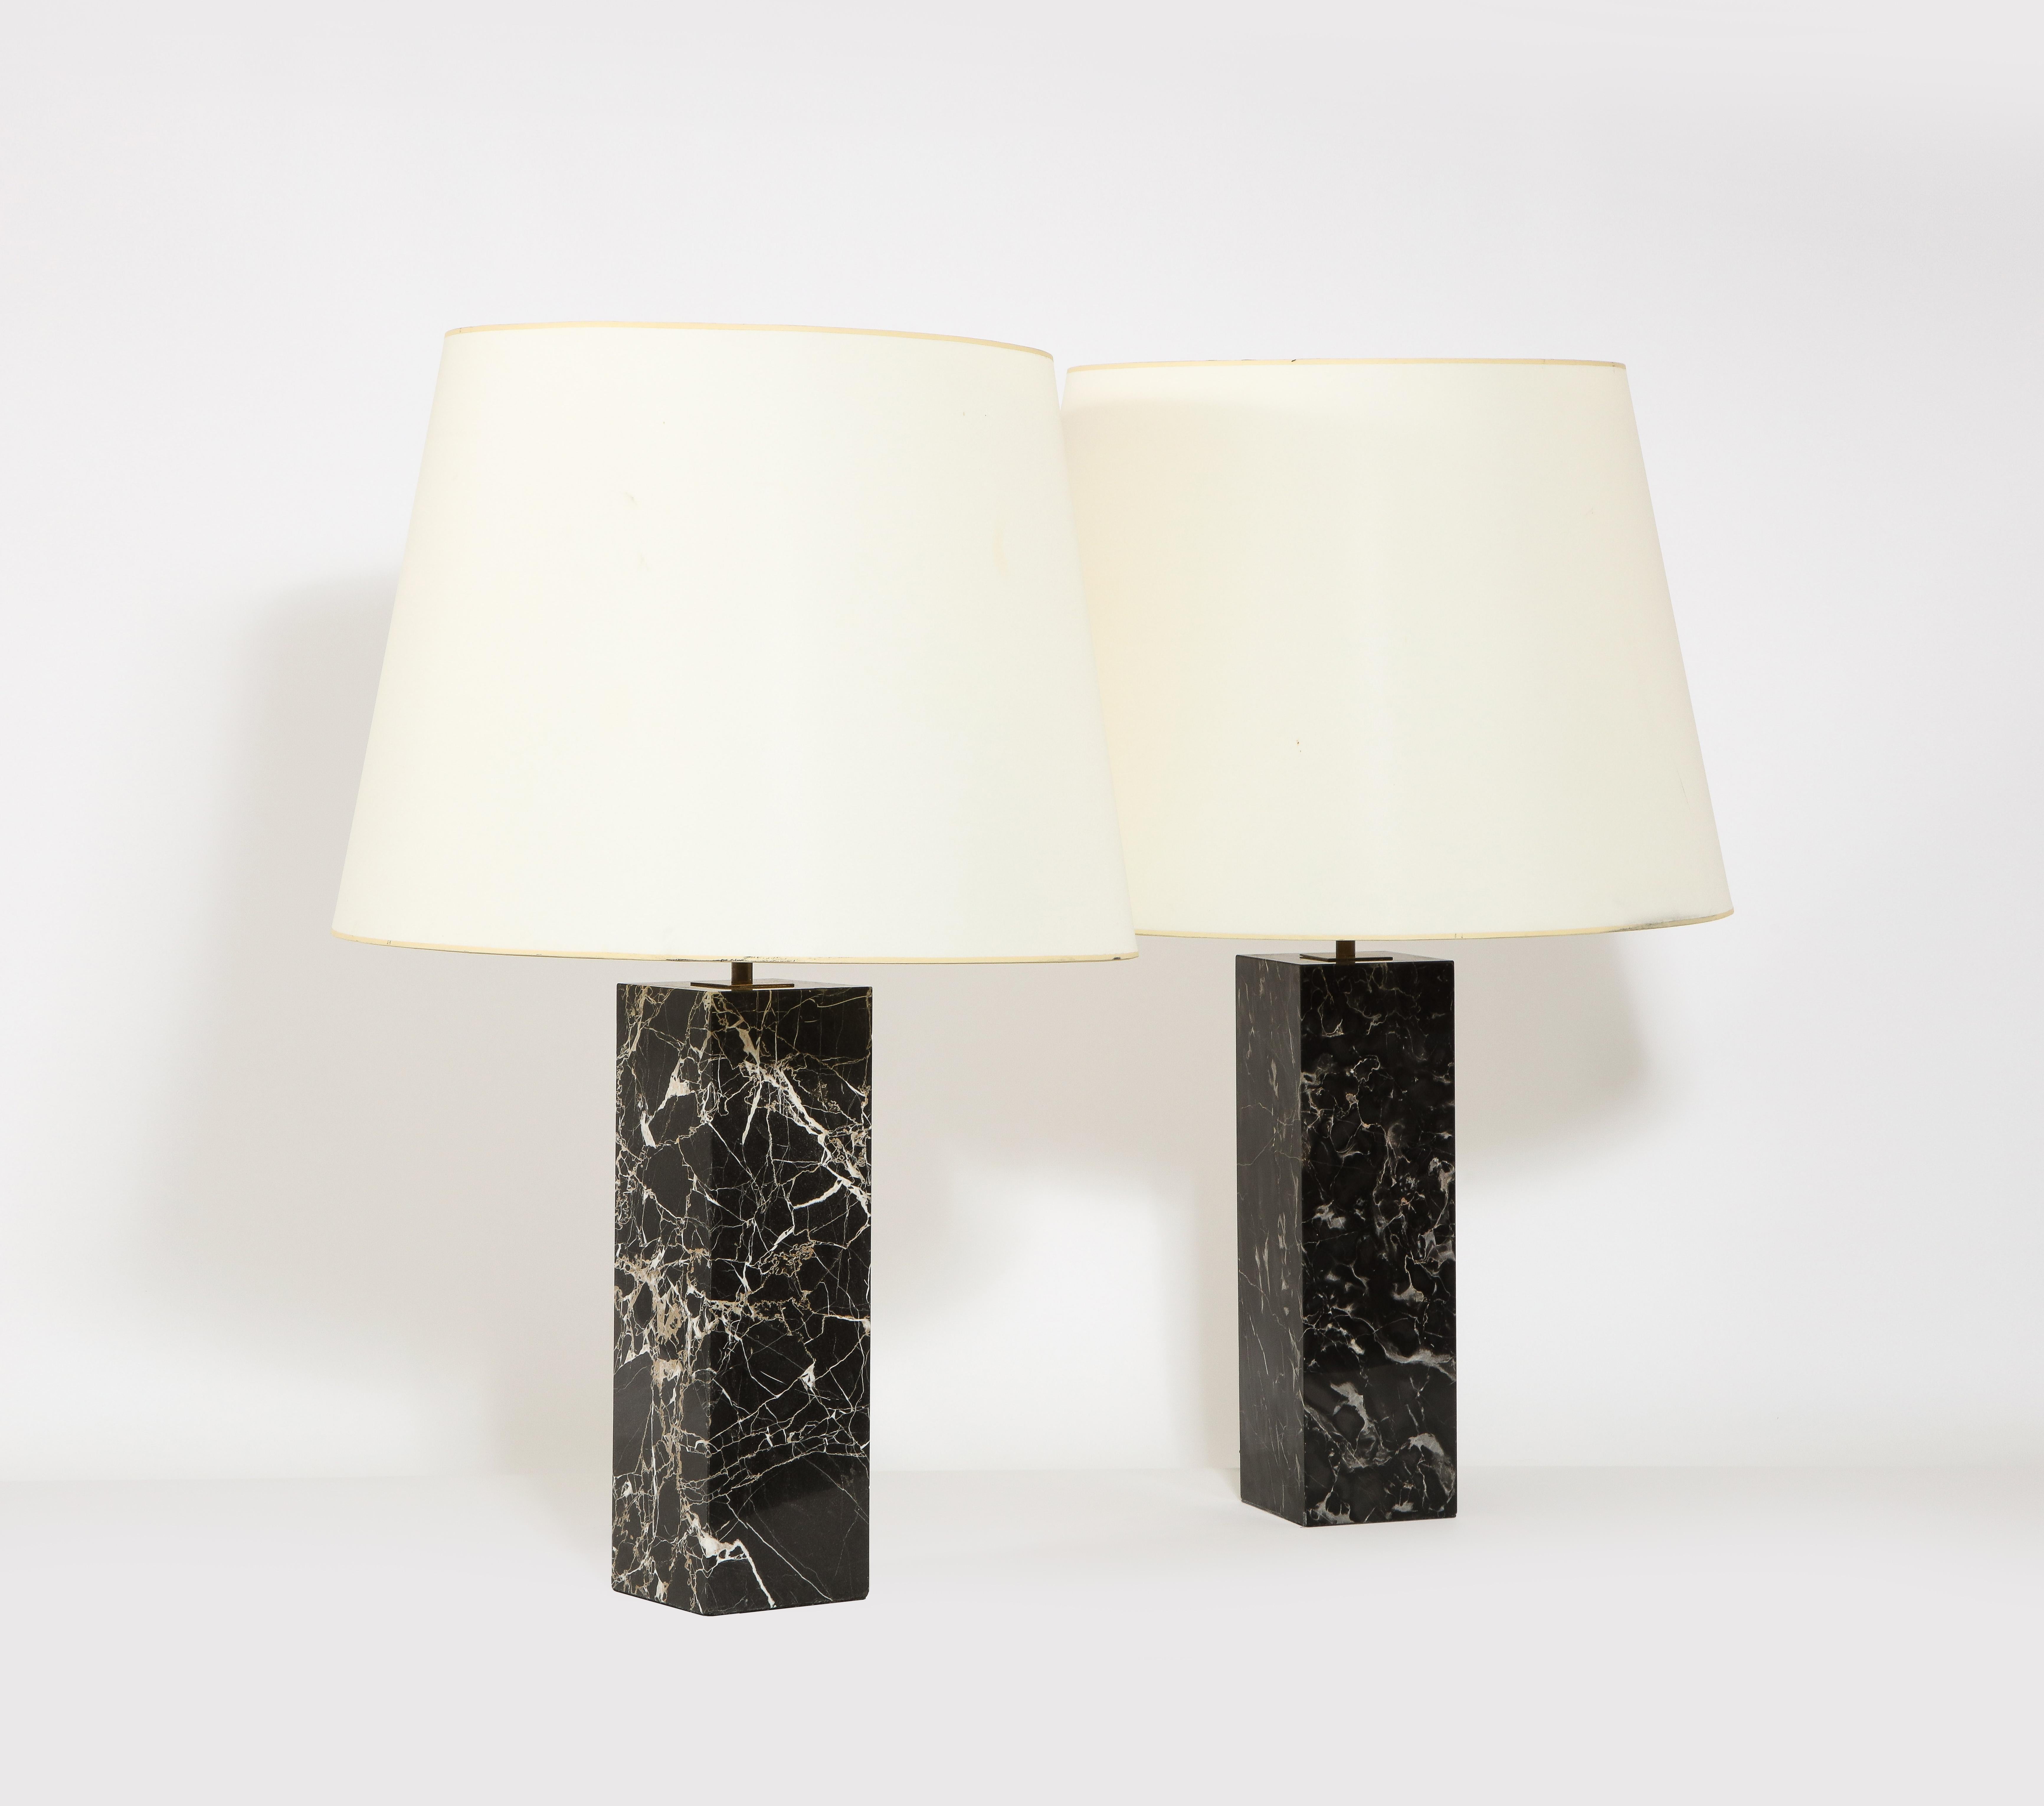 Large pair of Hansen table lamps in beautifully veined marble with brass hardware. Shades are for photographic purposes. A single is also available separately.